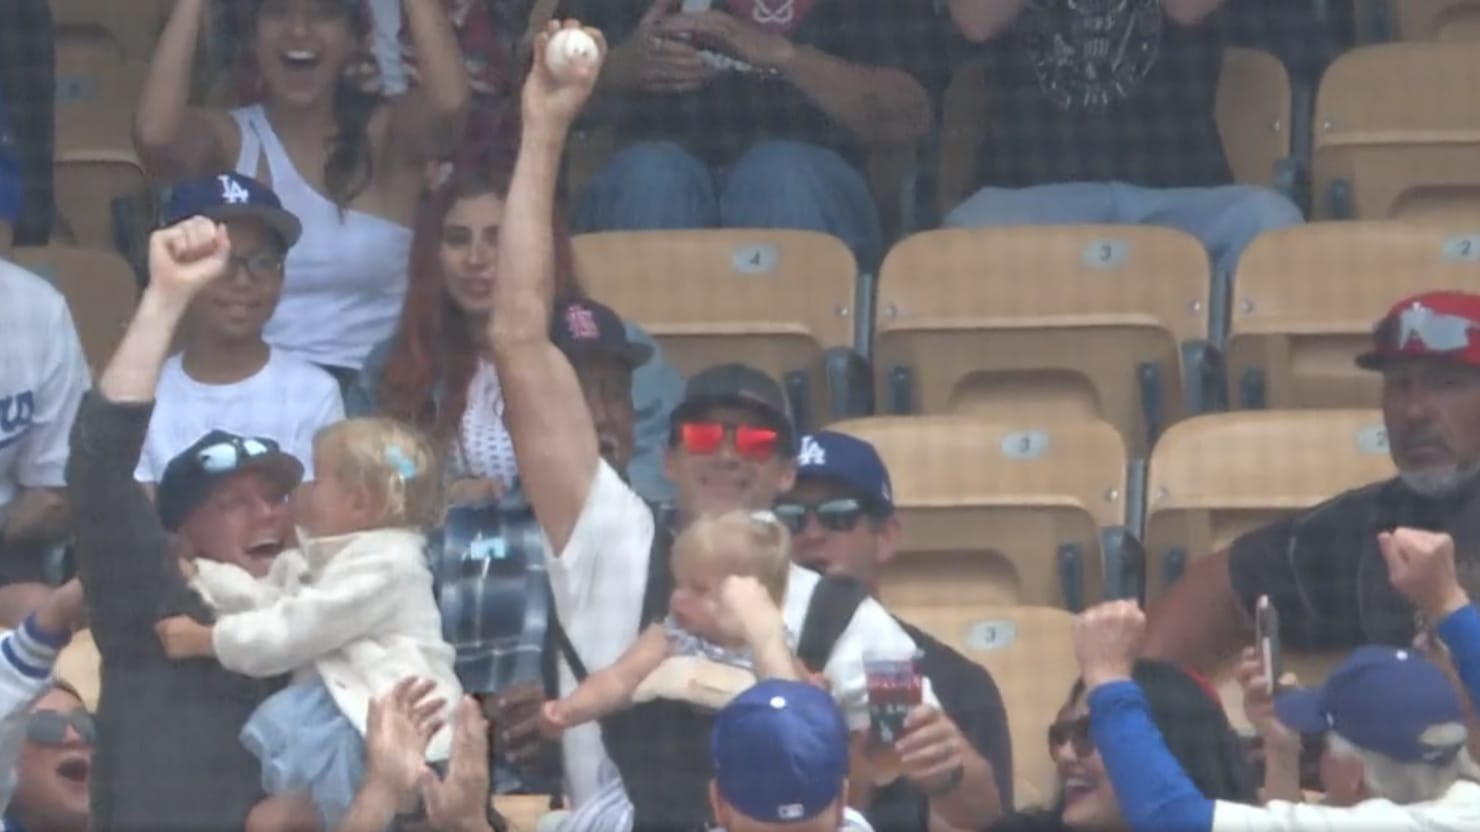 Dodgers fan catches foul ball at Sunday's baseball game while juggling baby  and a beer, viral video shows - ABC7 Los Angeles